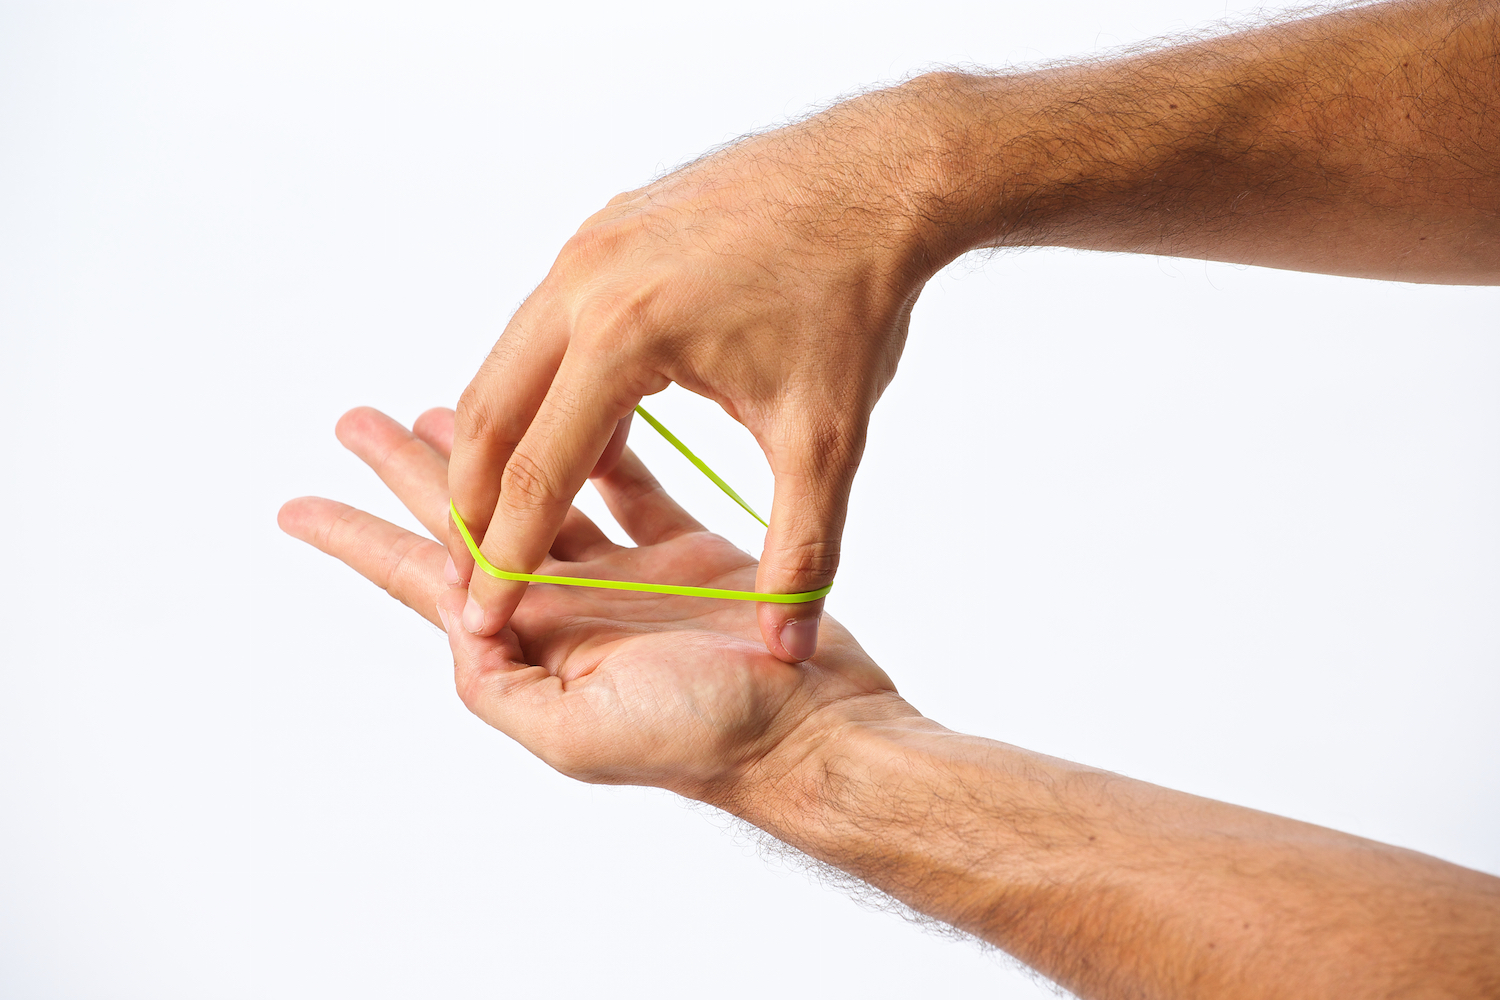 Rubber Band Hand Exercise Hand Exercises & Wrist Exercises